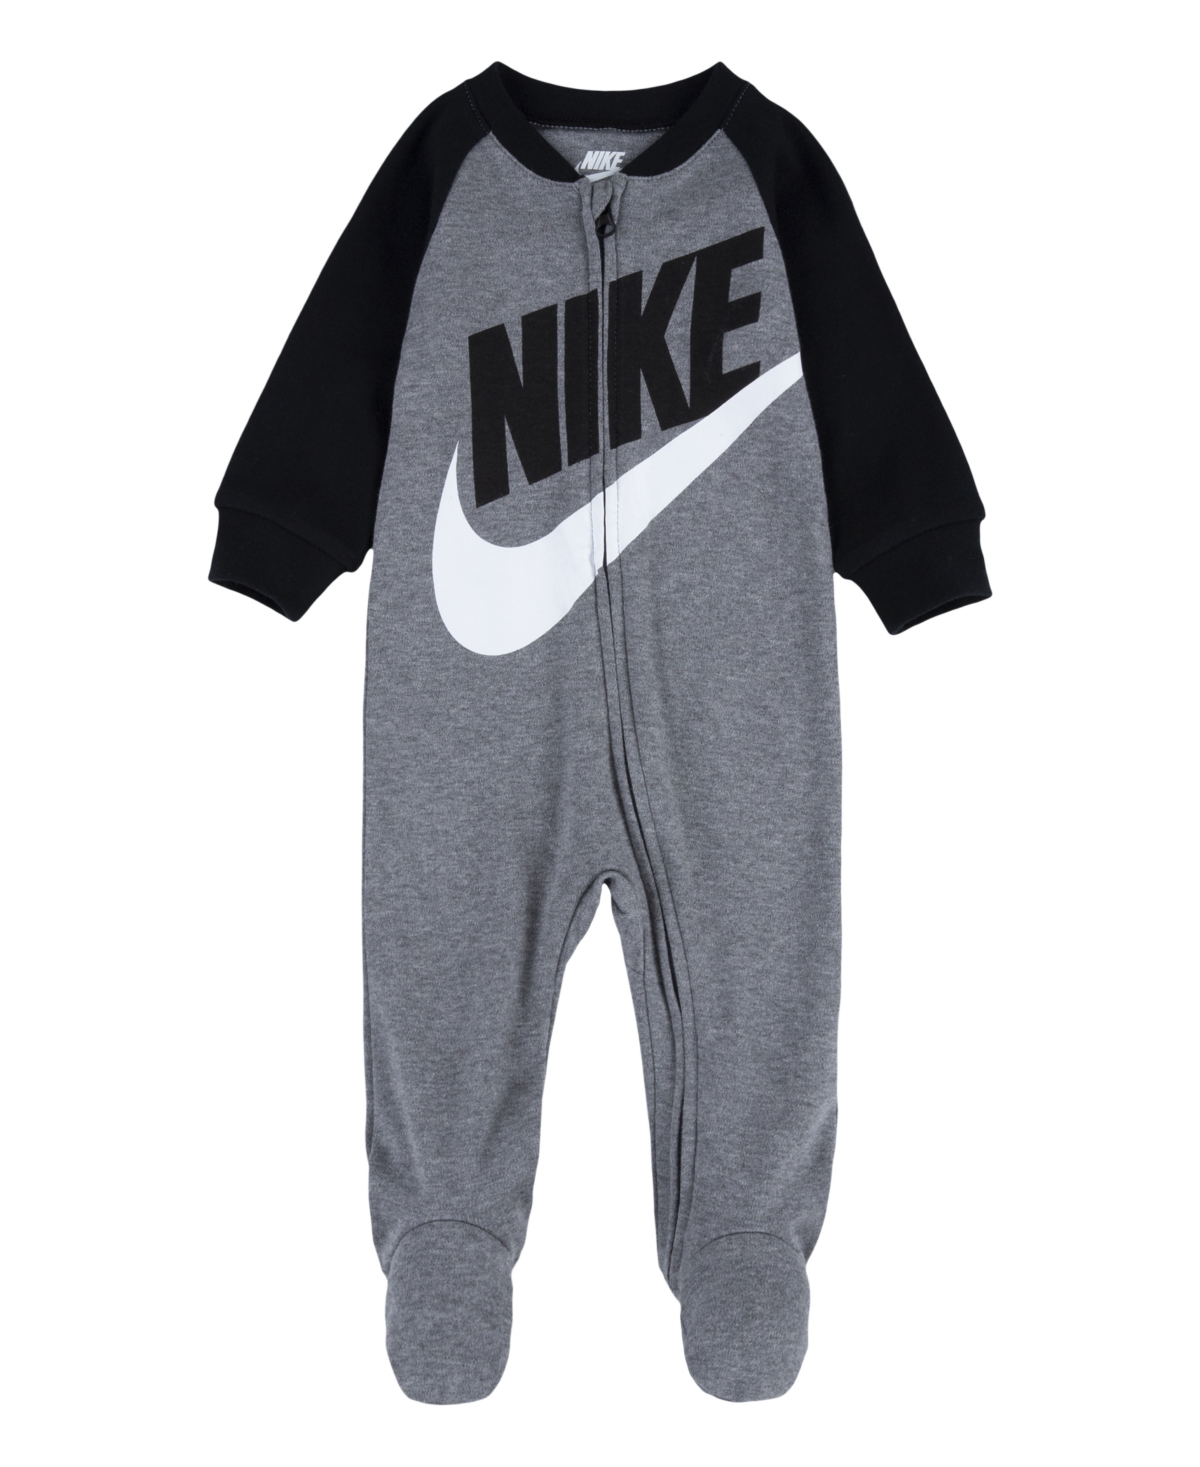 Nike Baby Boys Raglan Footed Coveralls In Carbon Heather